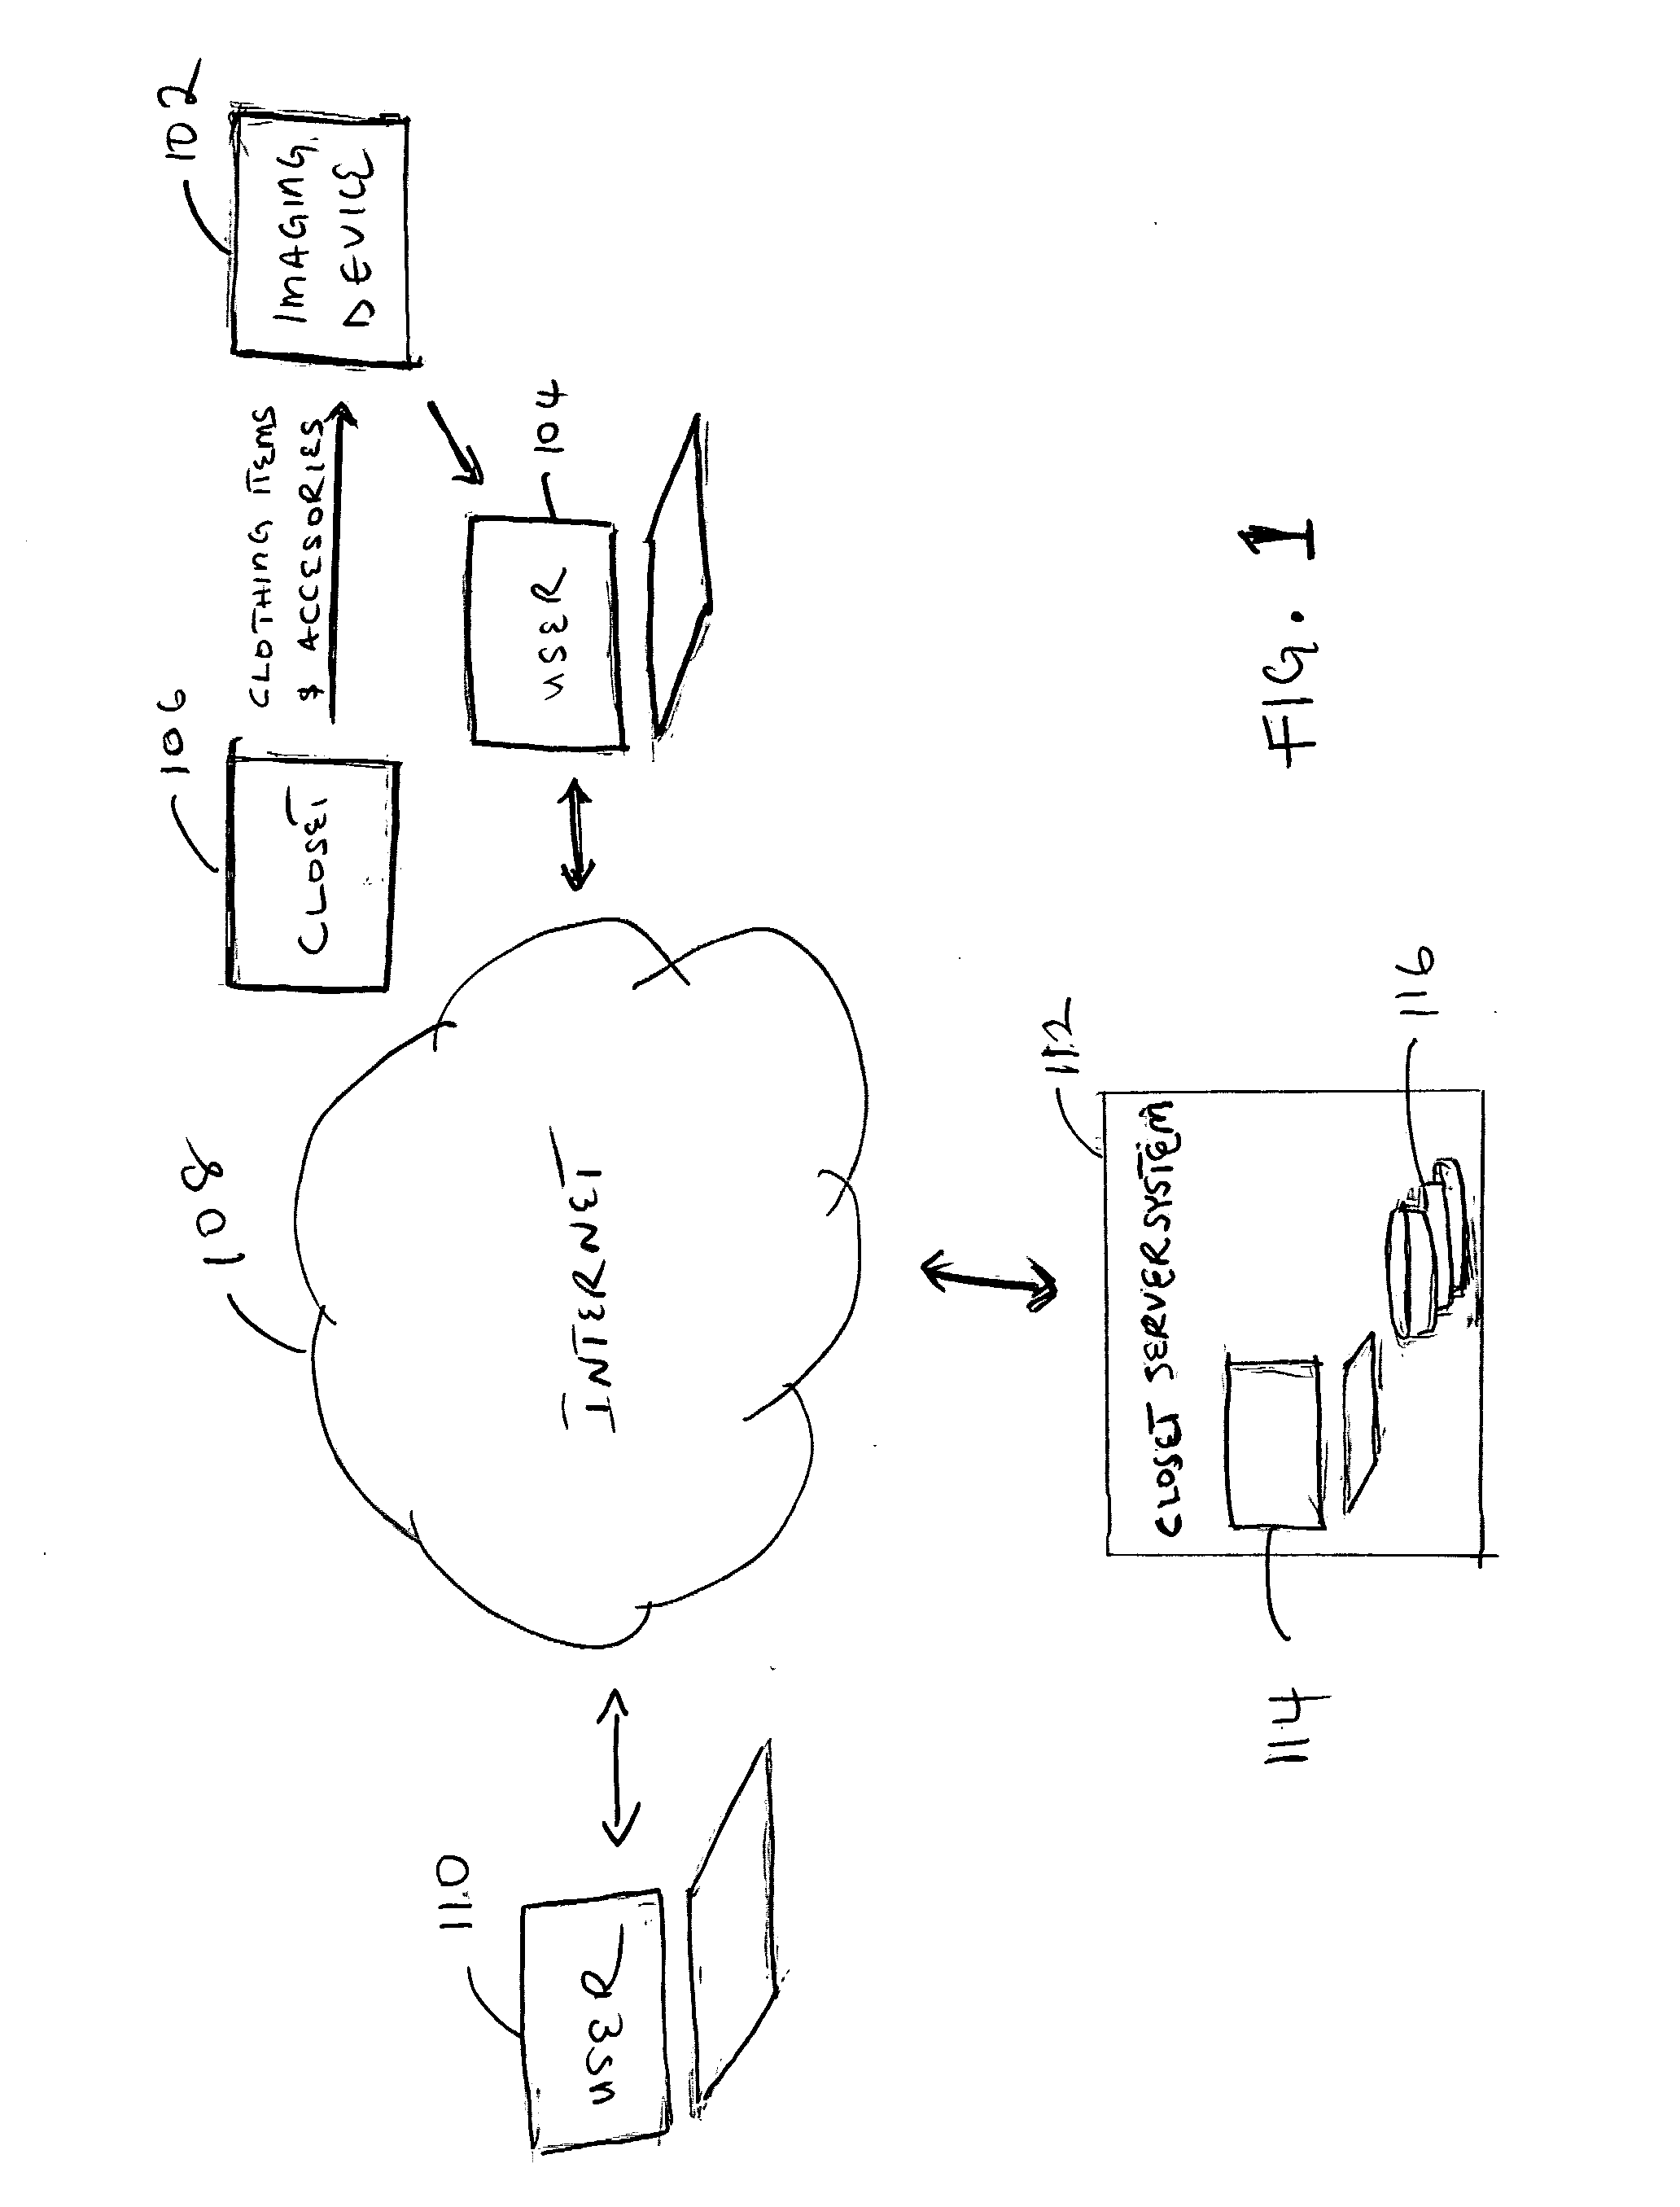 Online closet management and organizer system and method